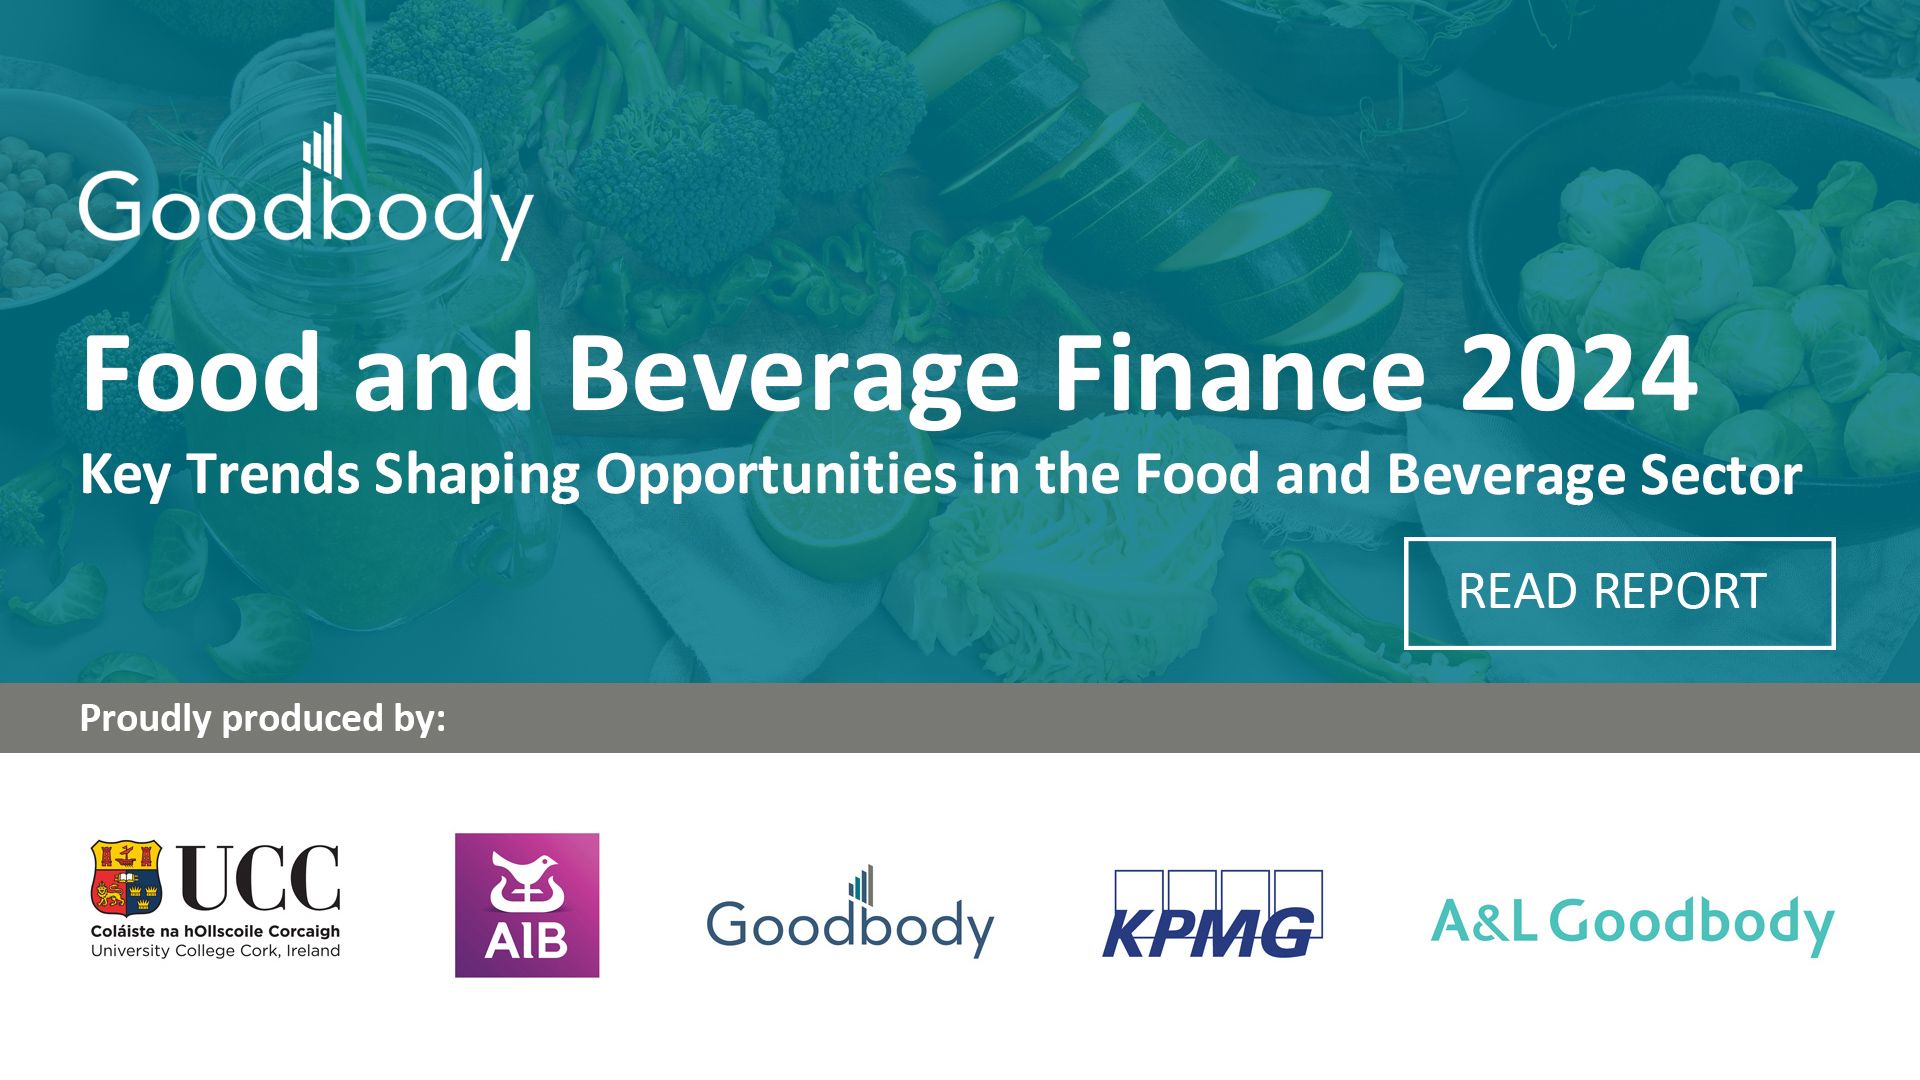 Key Trends Shaping Opportunities in the Food and Beverage Sector